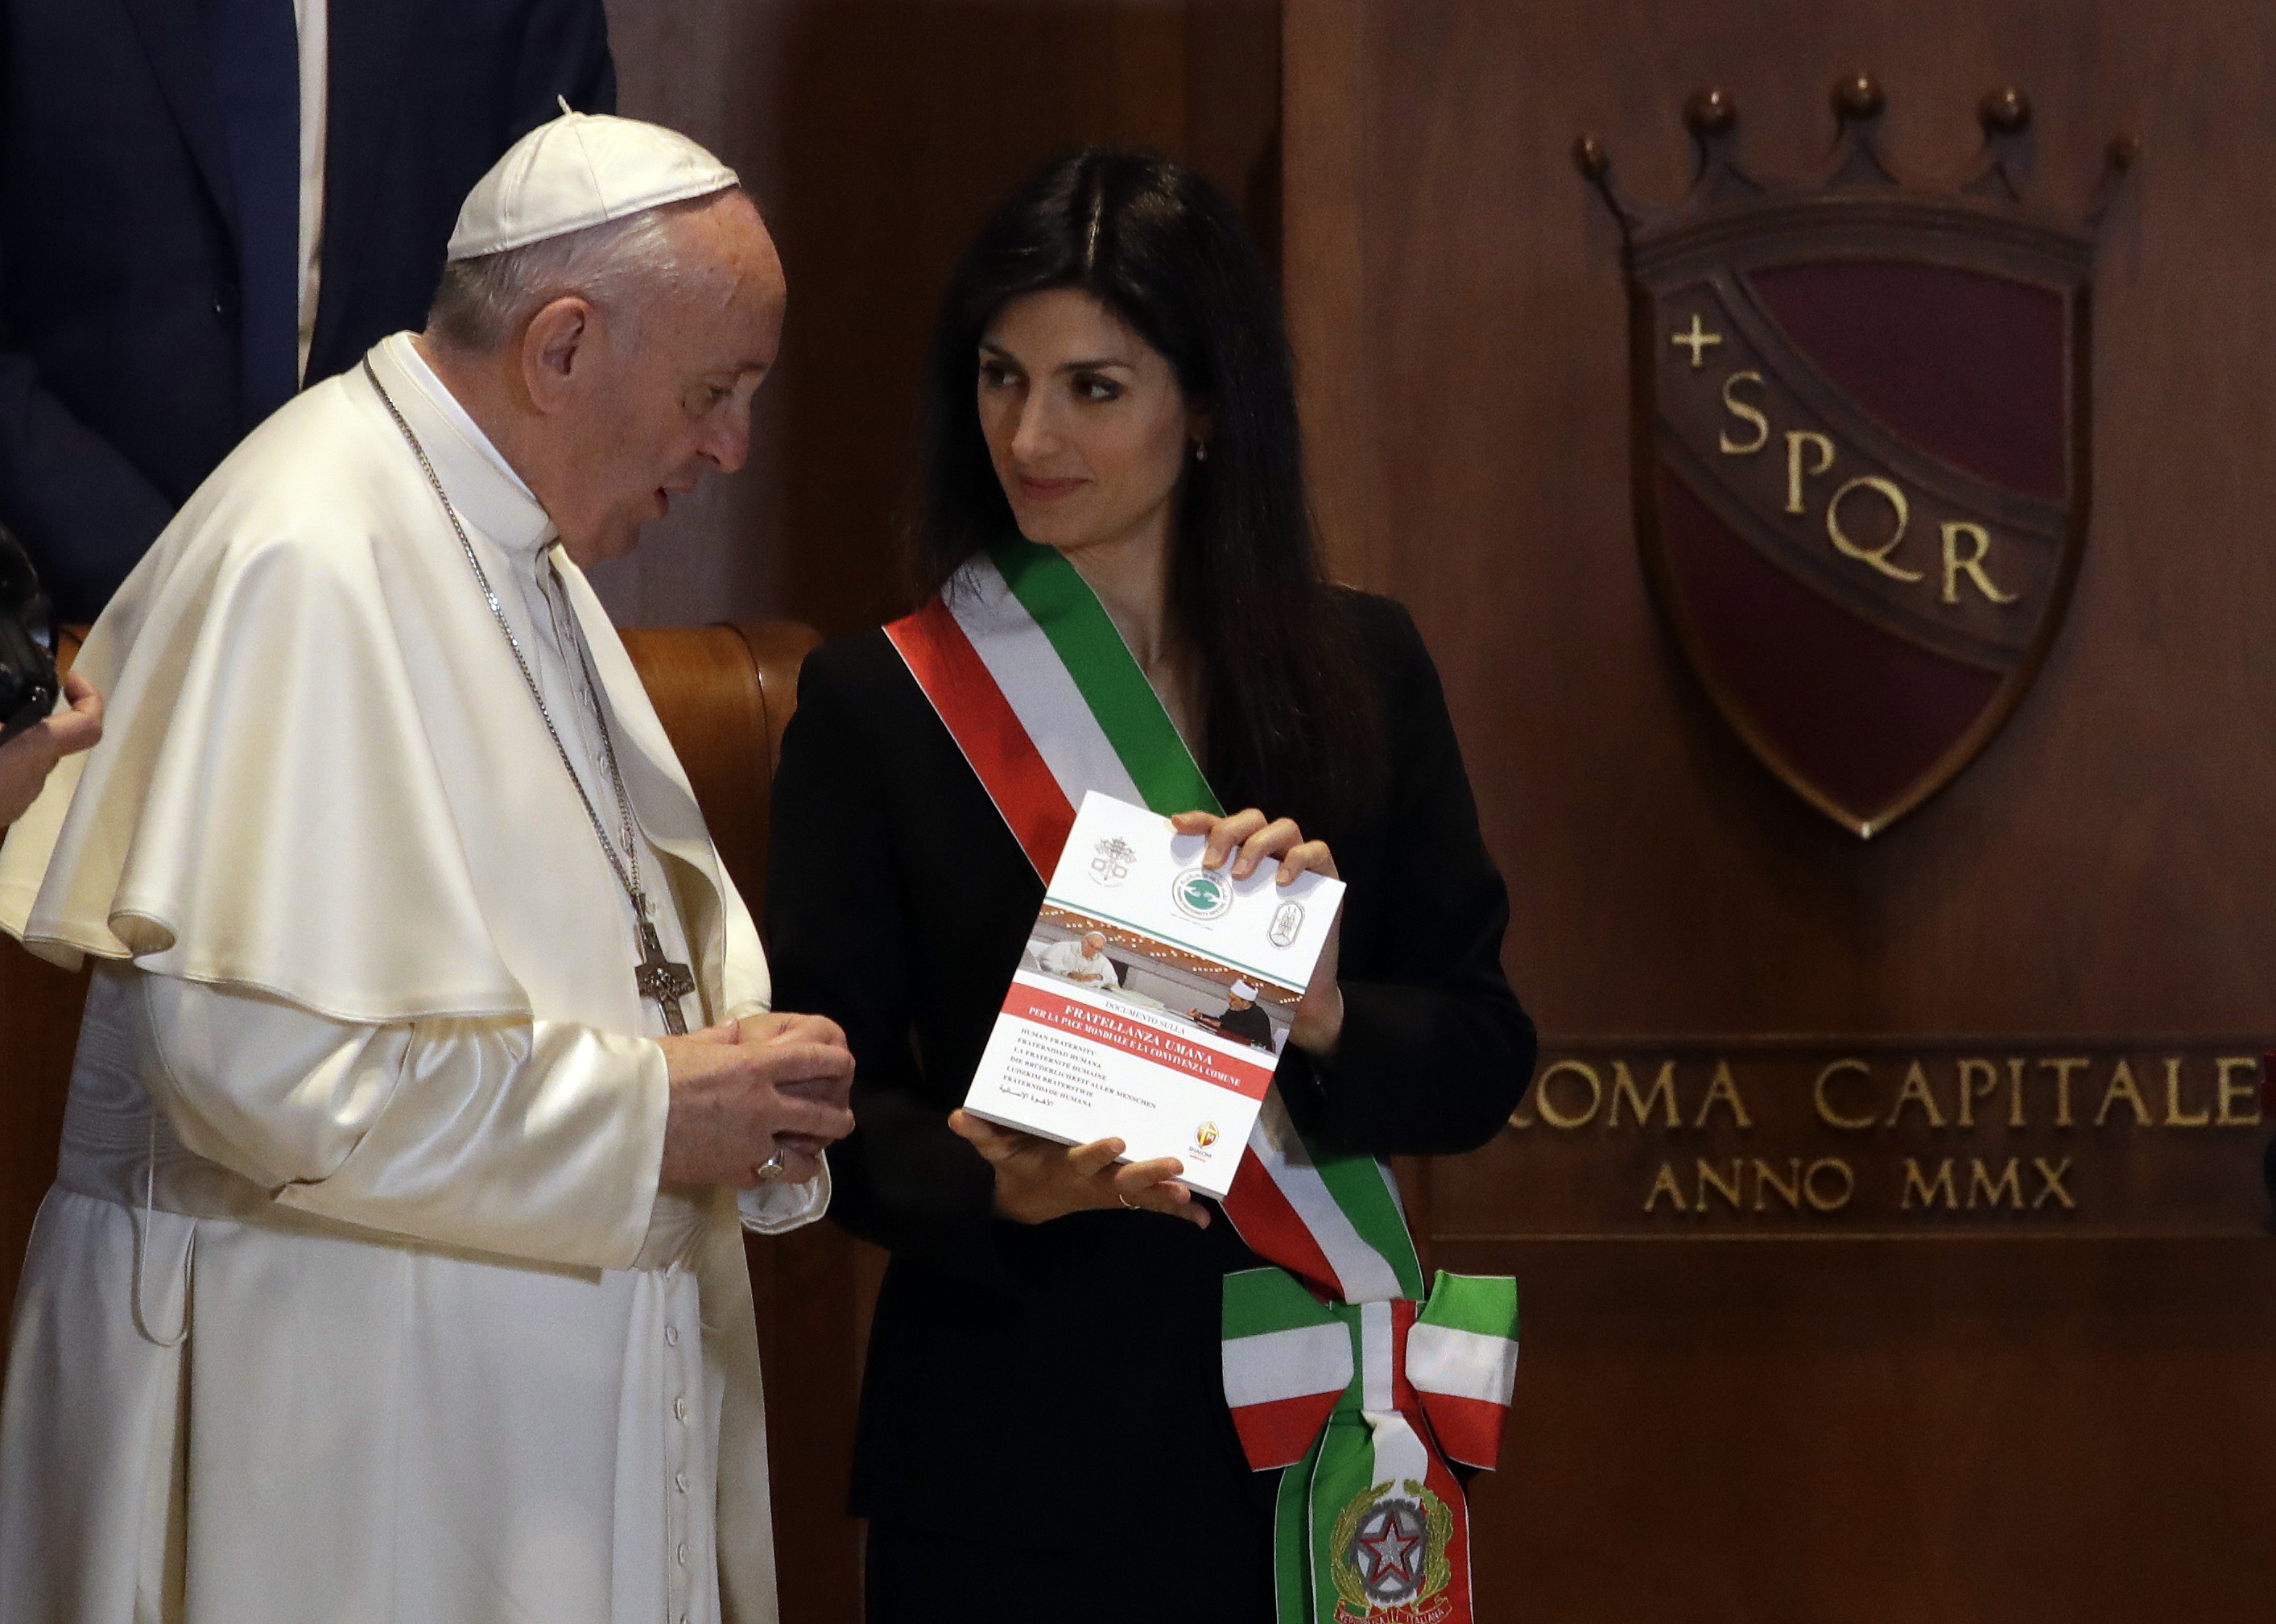 Pope Francis, exchanges gifts with Rome's Mayor Virginia Raggi, right, in the Julius Caesar Hall during his visit to the Campidoglio, Capitol Hill, in Rome, Tuesday, March 26, 2019. (AP Photo/Alessandra Tarantino)